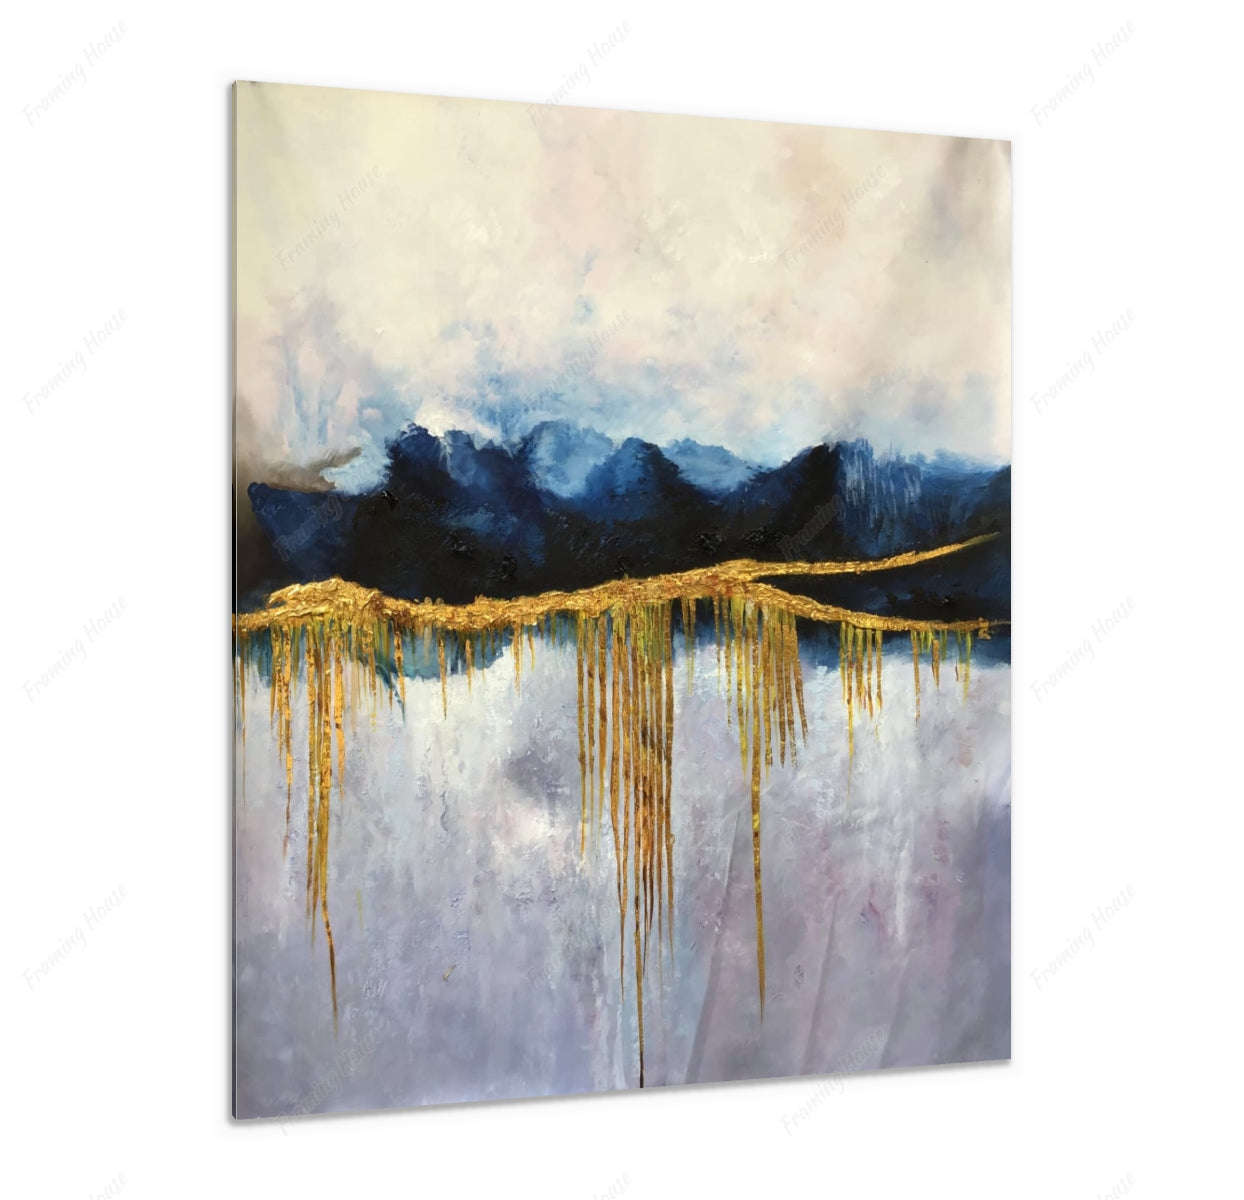 abstract handmade paintngs Wall art